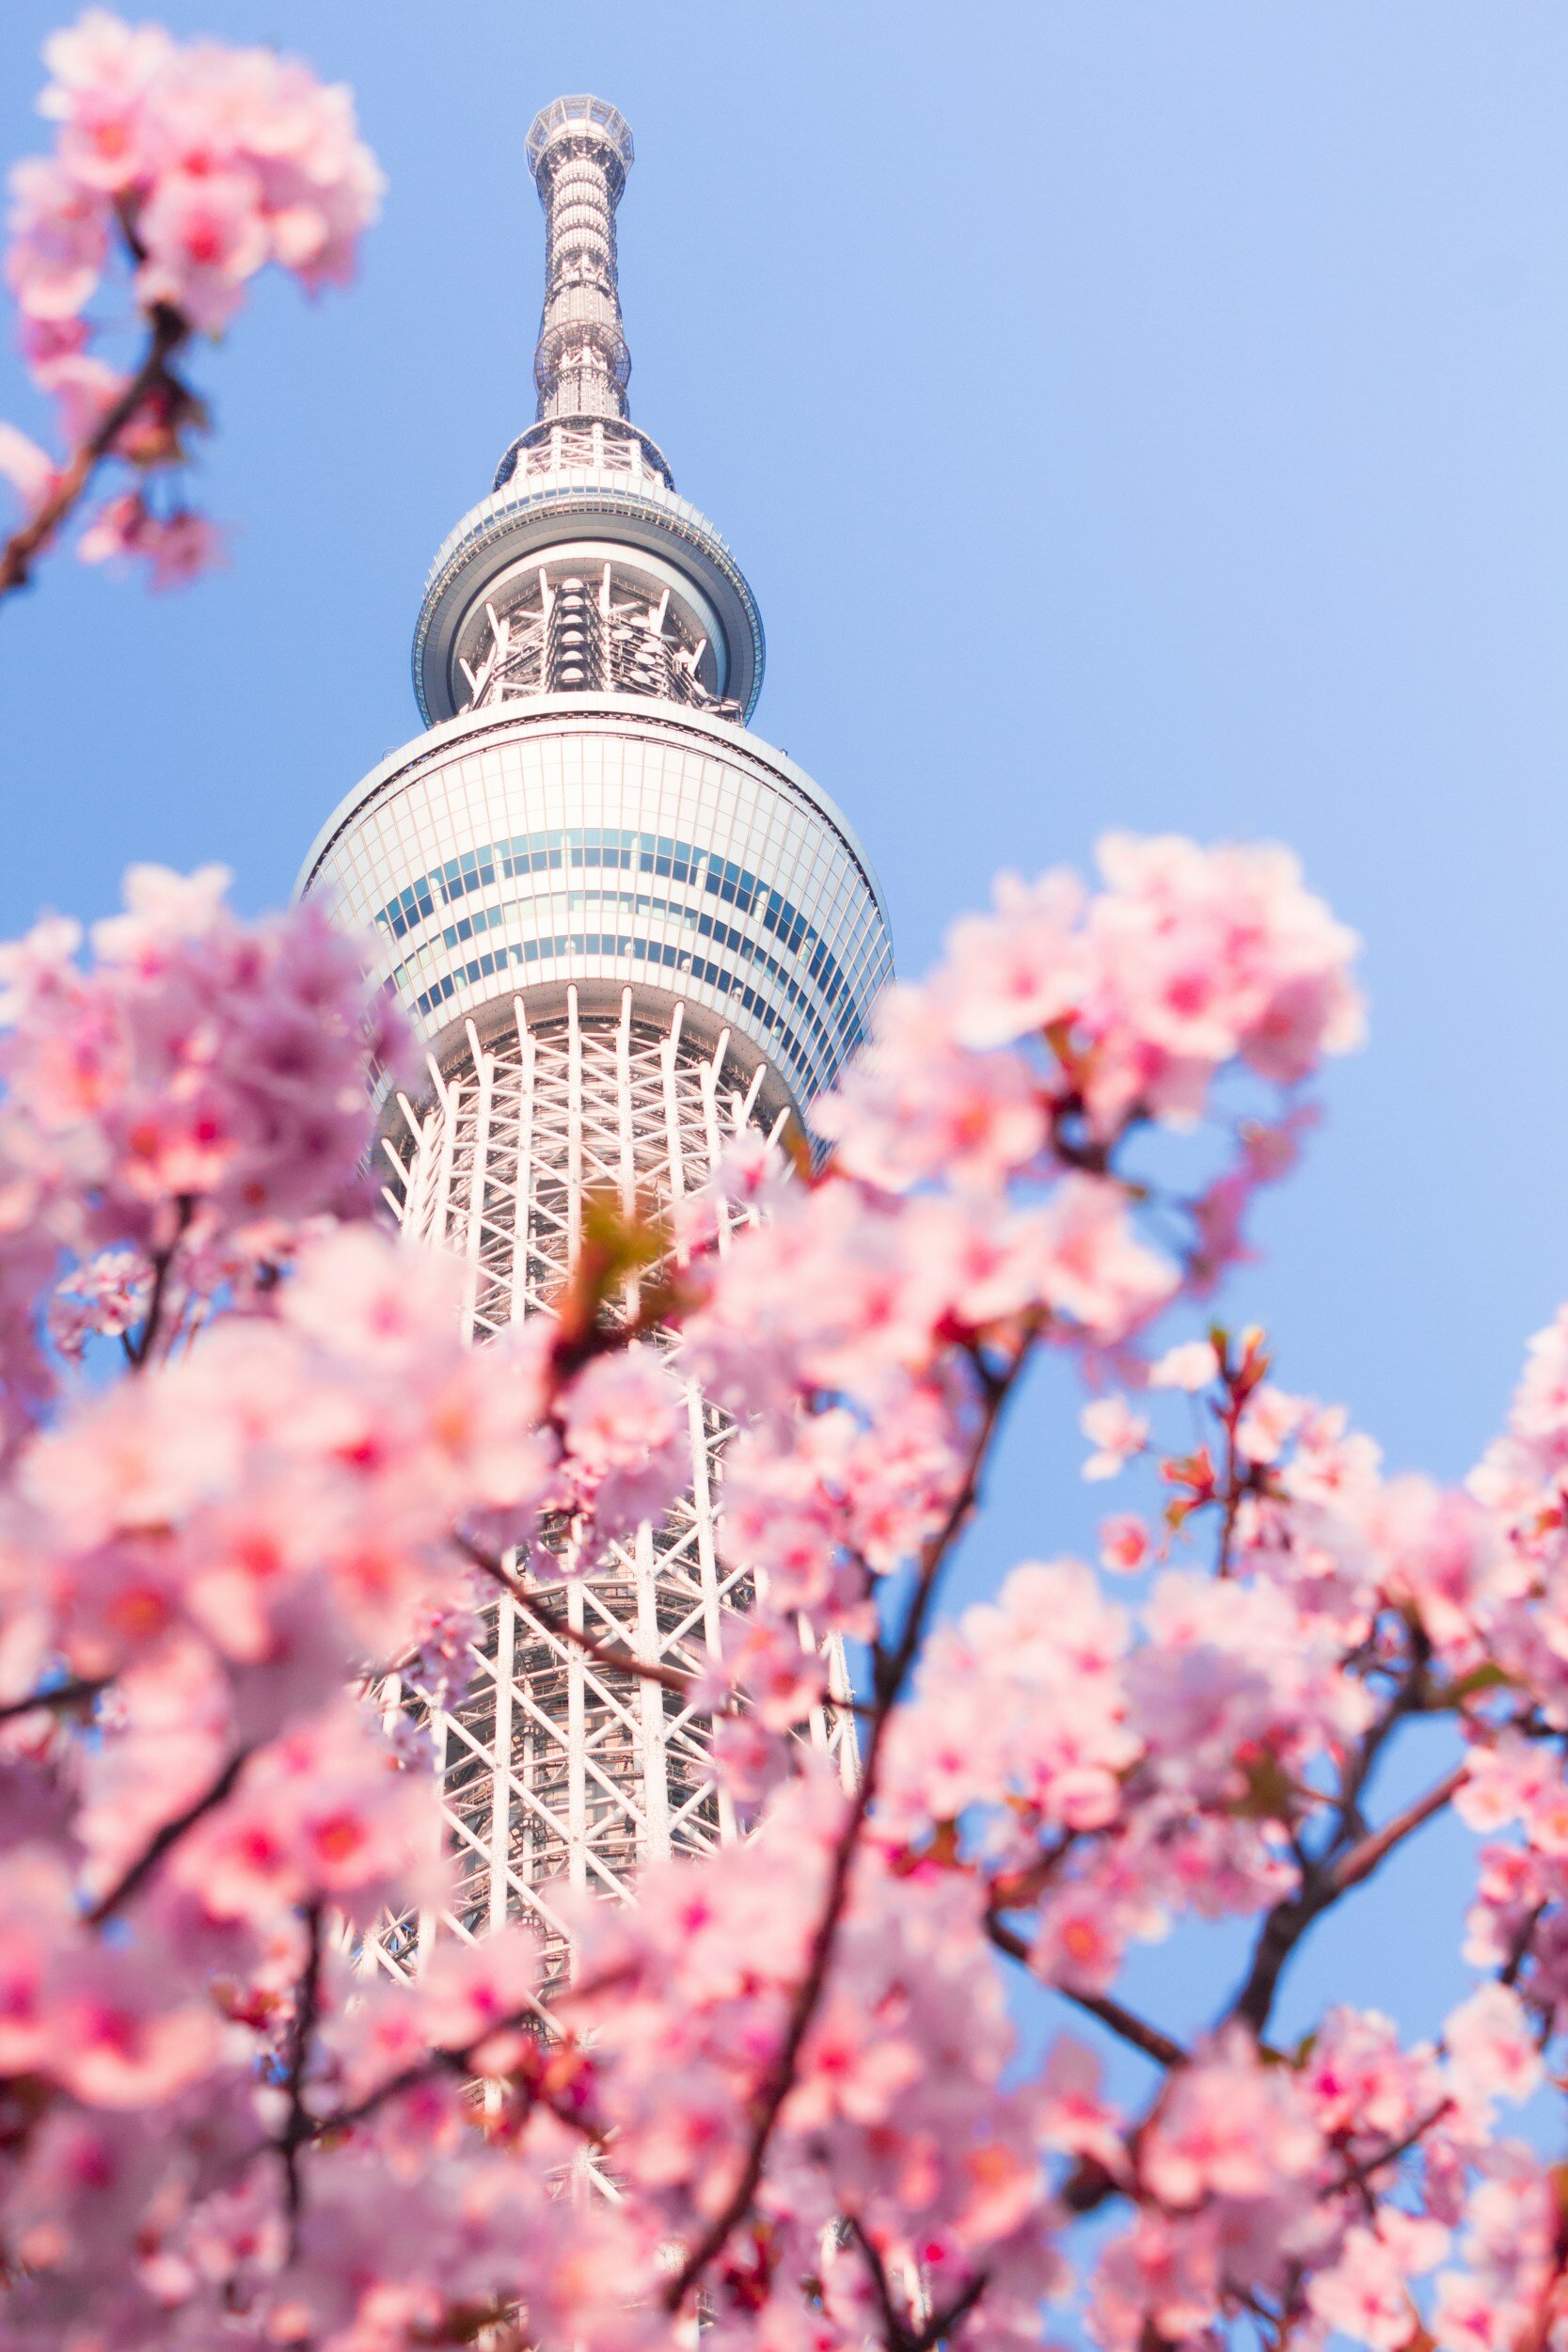 metal tower of tokyo skytree partially obscured by pink cherry blossom